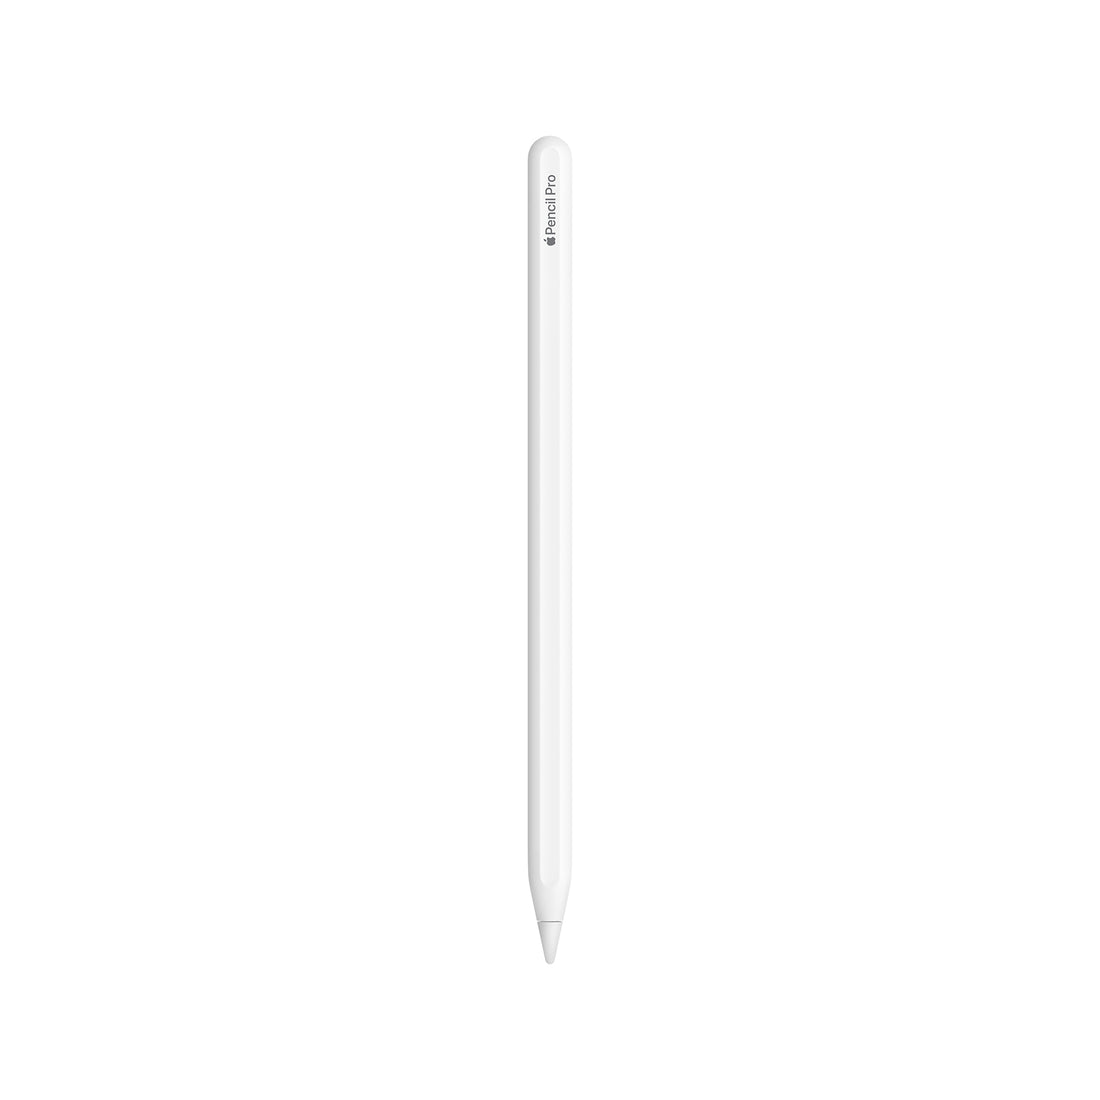 Apple Pencil Pro - Preorder now. Pickup starting May 15th